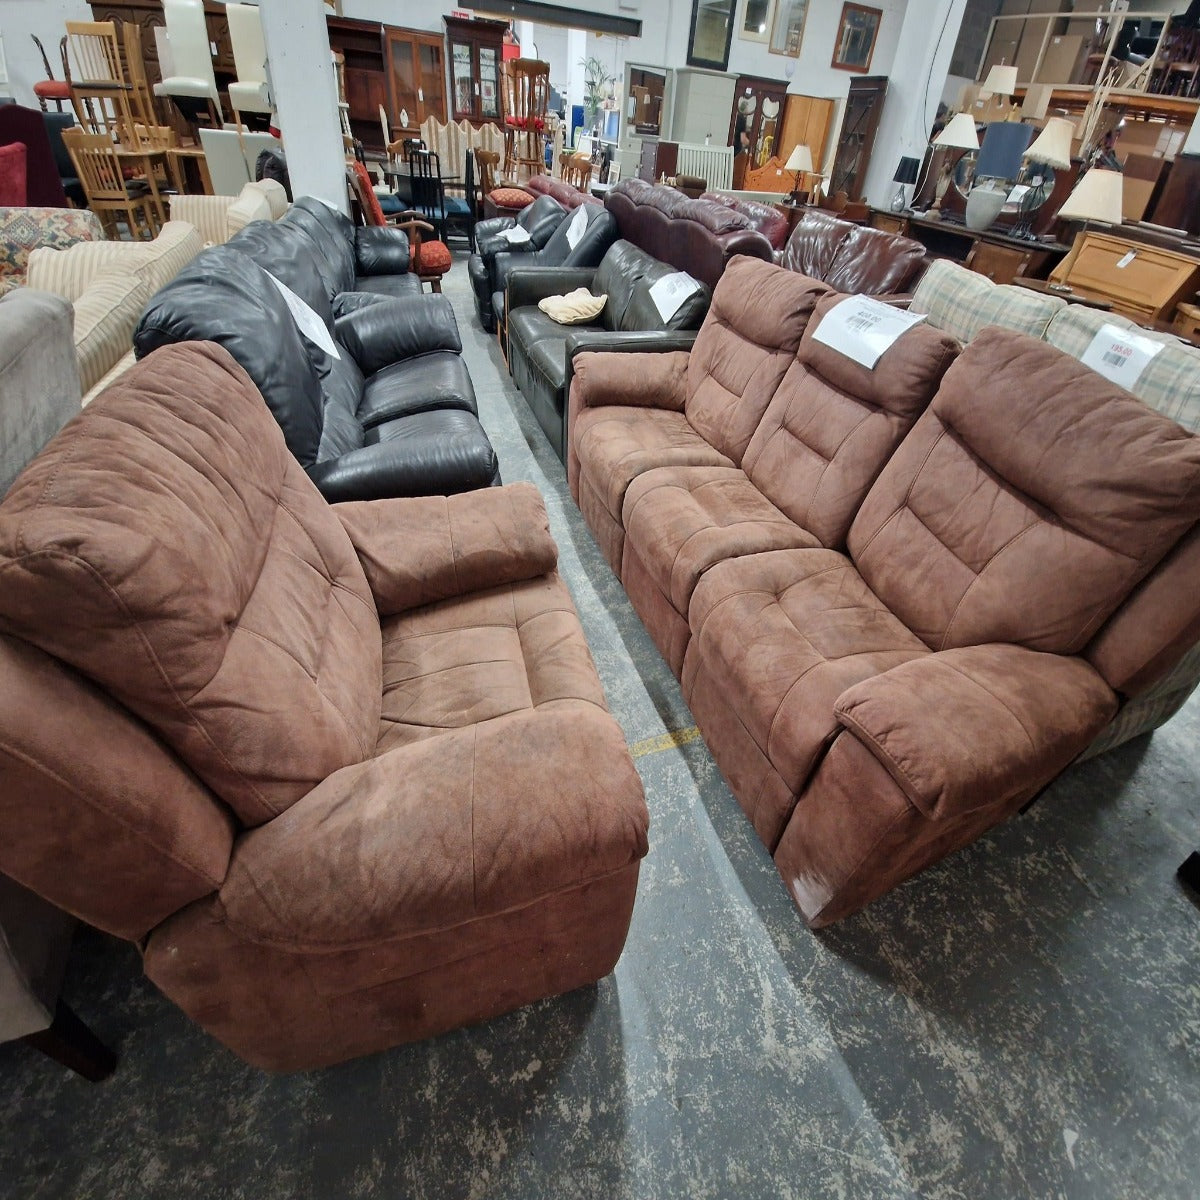 3 seater Manual + 1 seater Electric RECLINER BROWN suede fabric suite